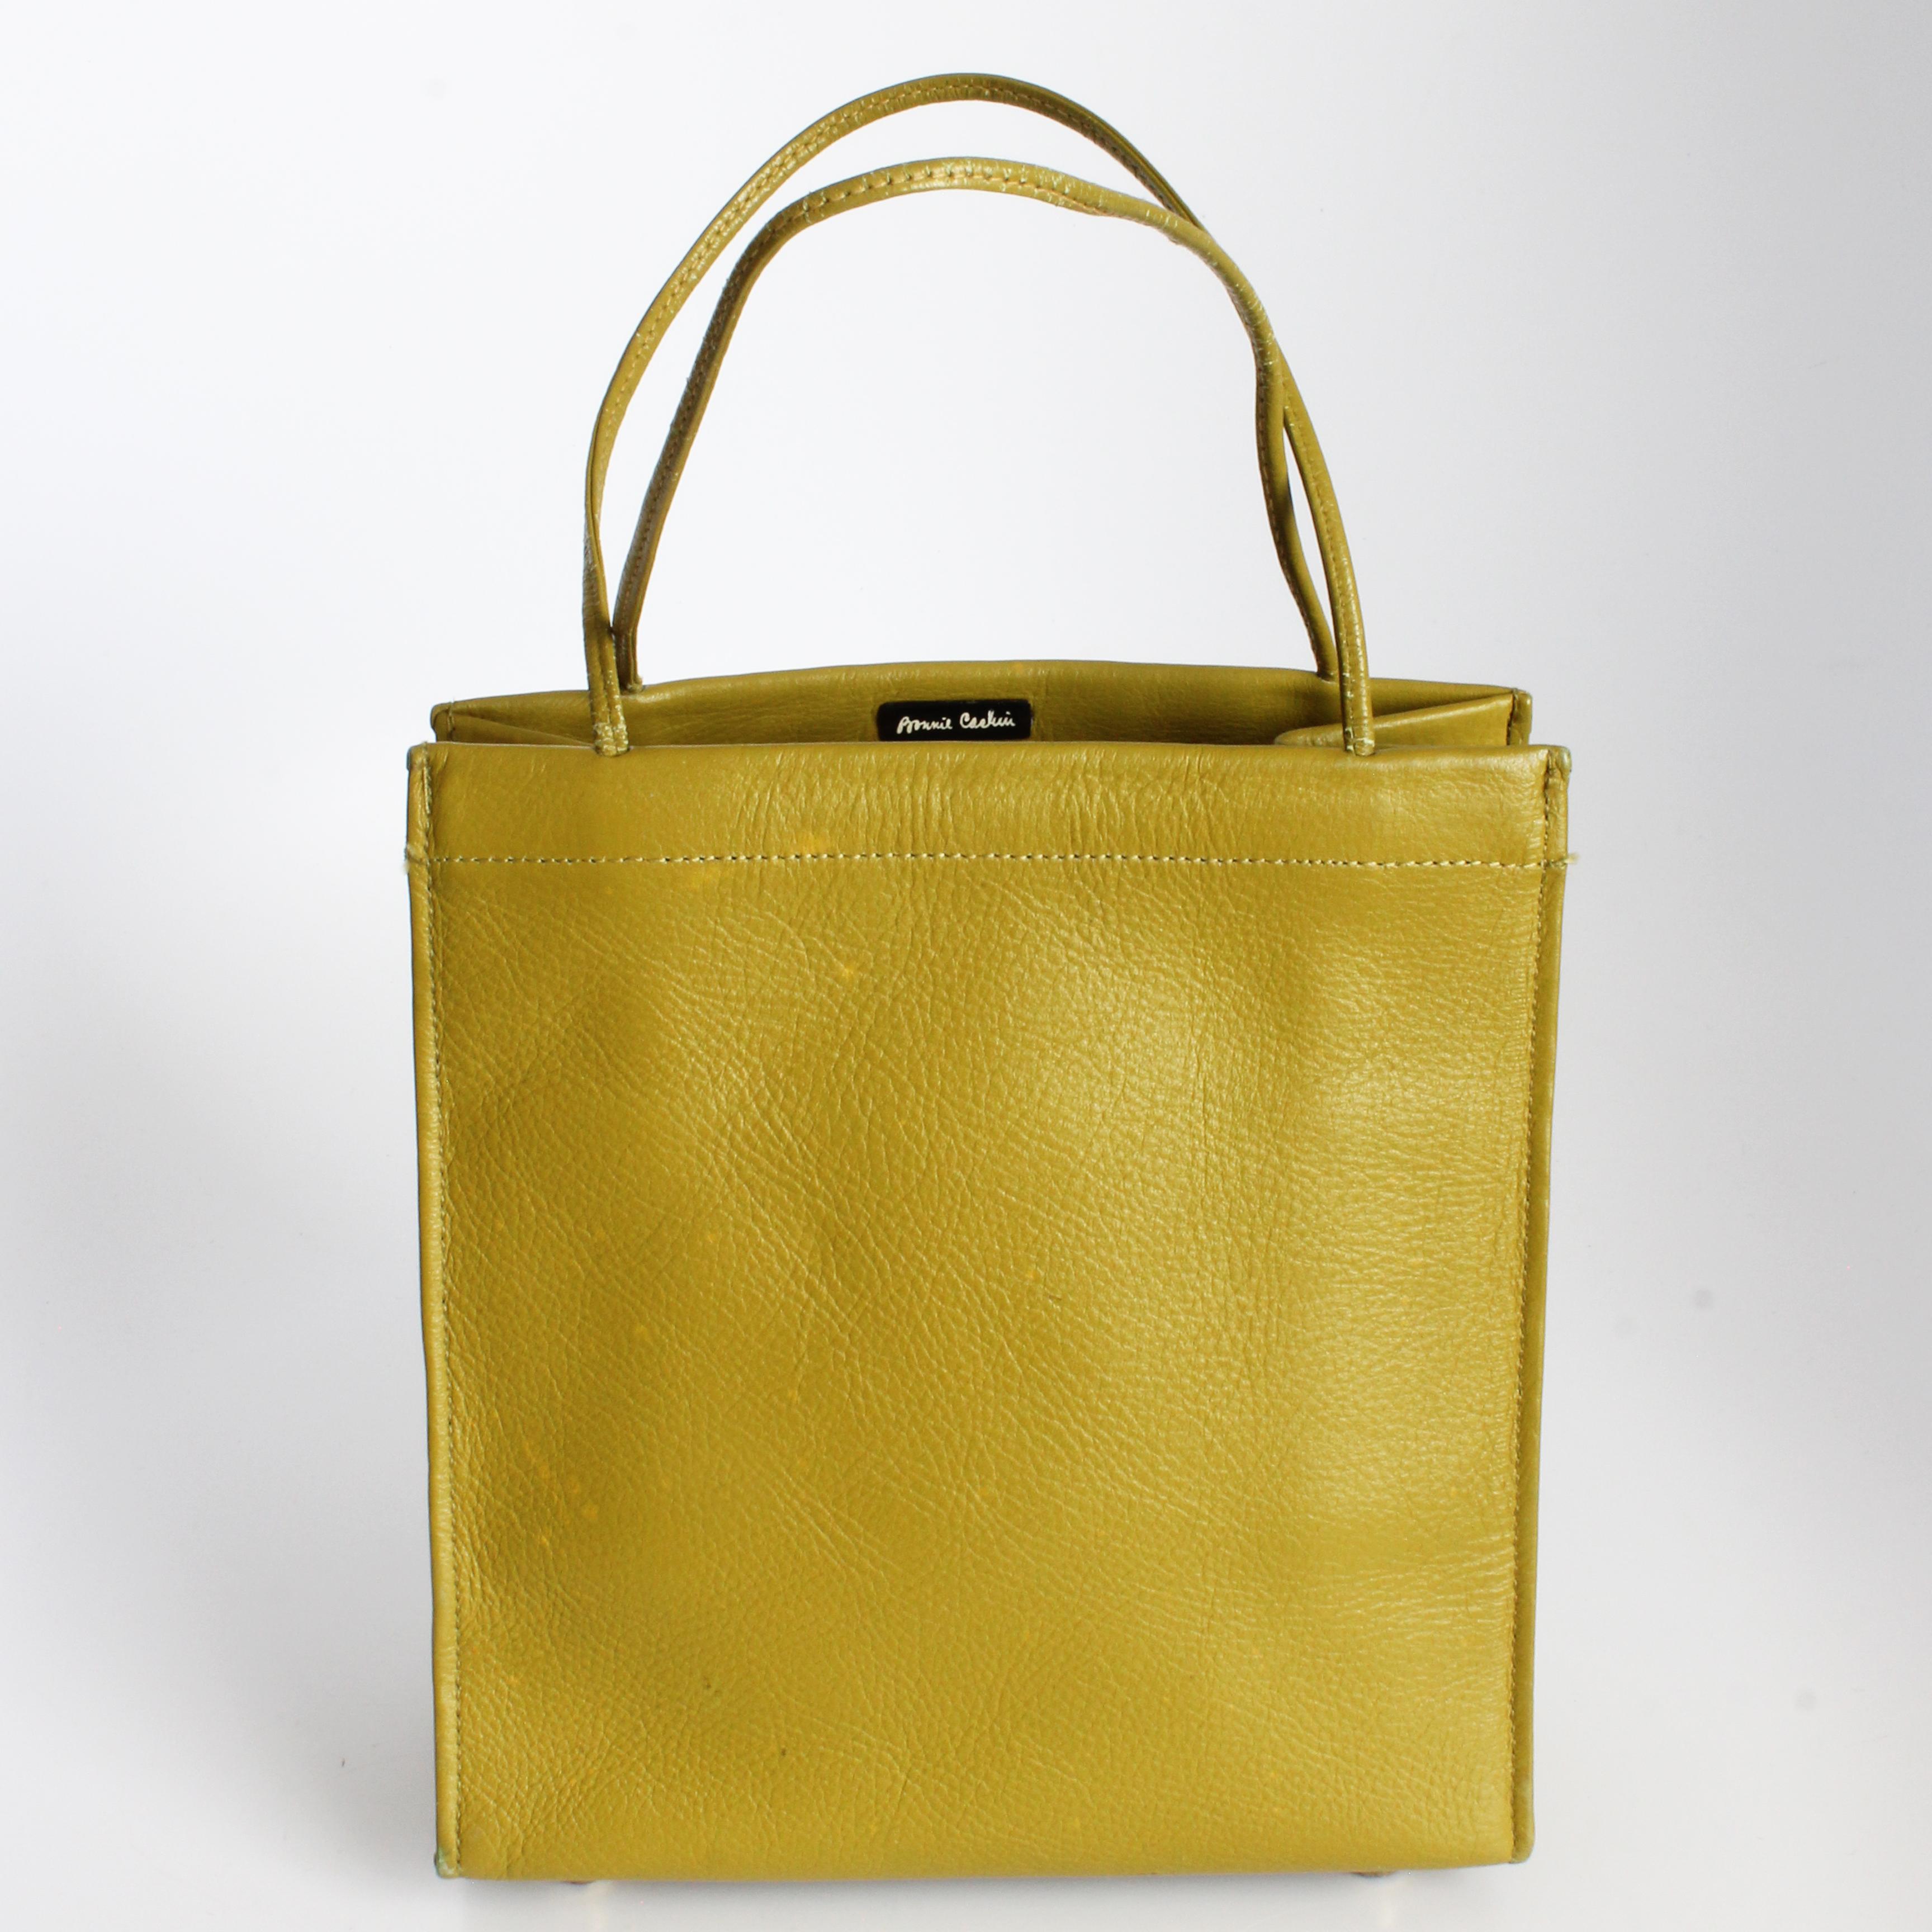 Bonnie Cashin for Coach Tiny Shopping Bag Tote Mimosa Leather Rare Vintage 1960s For Sale 3